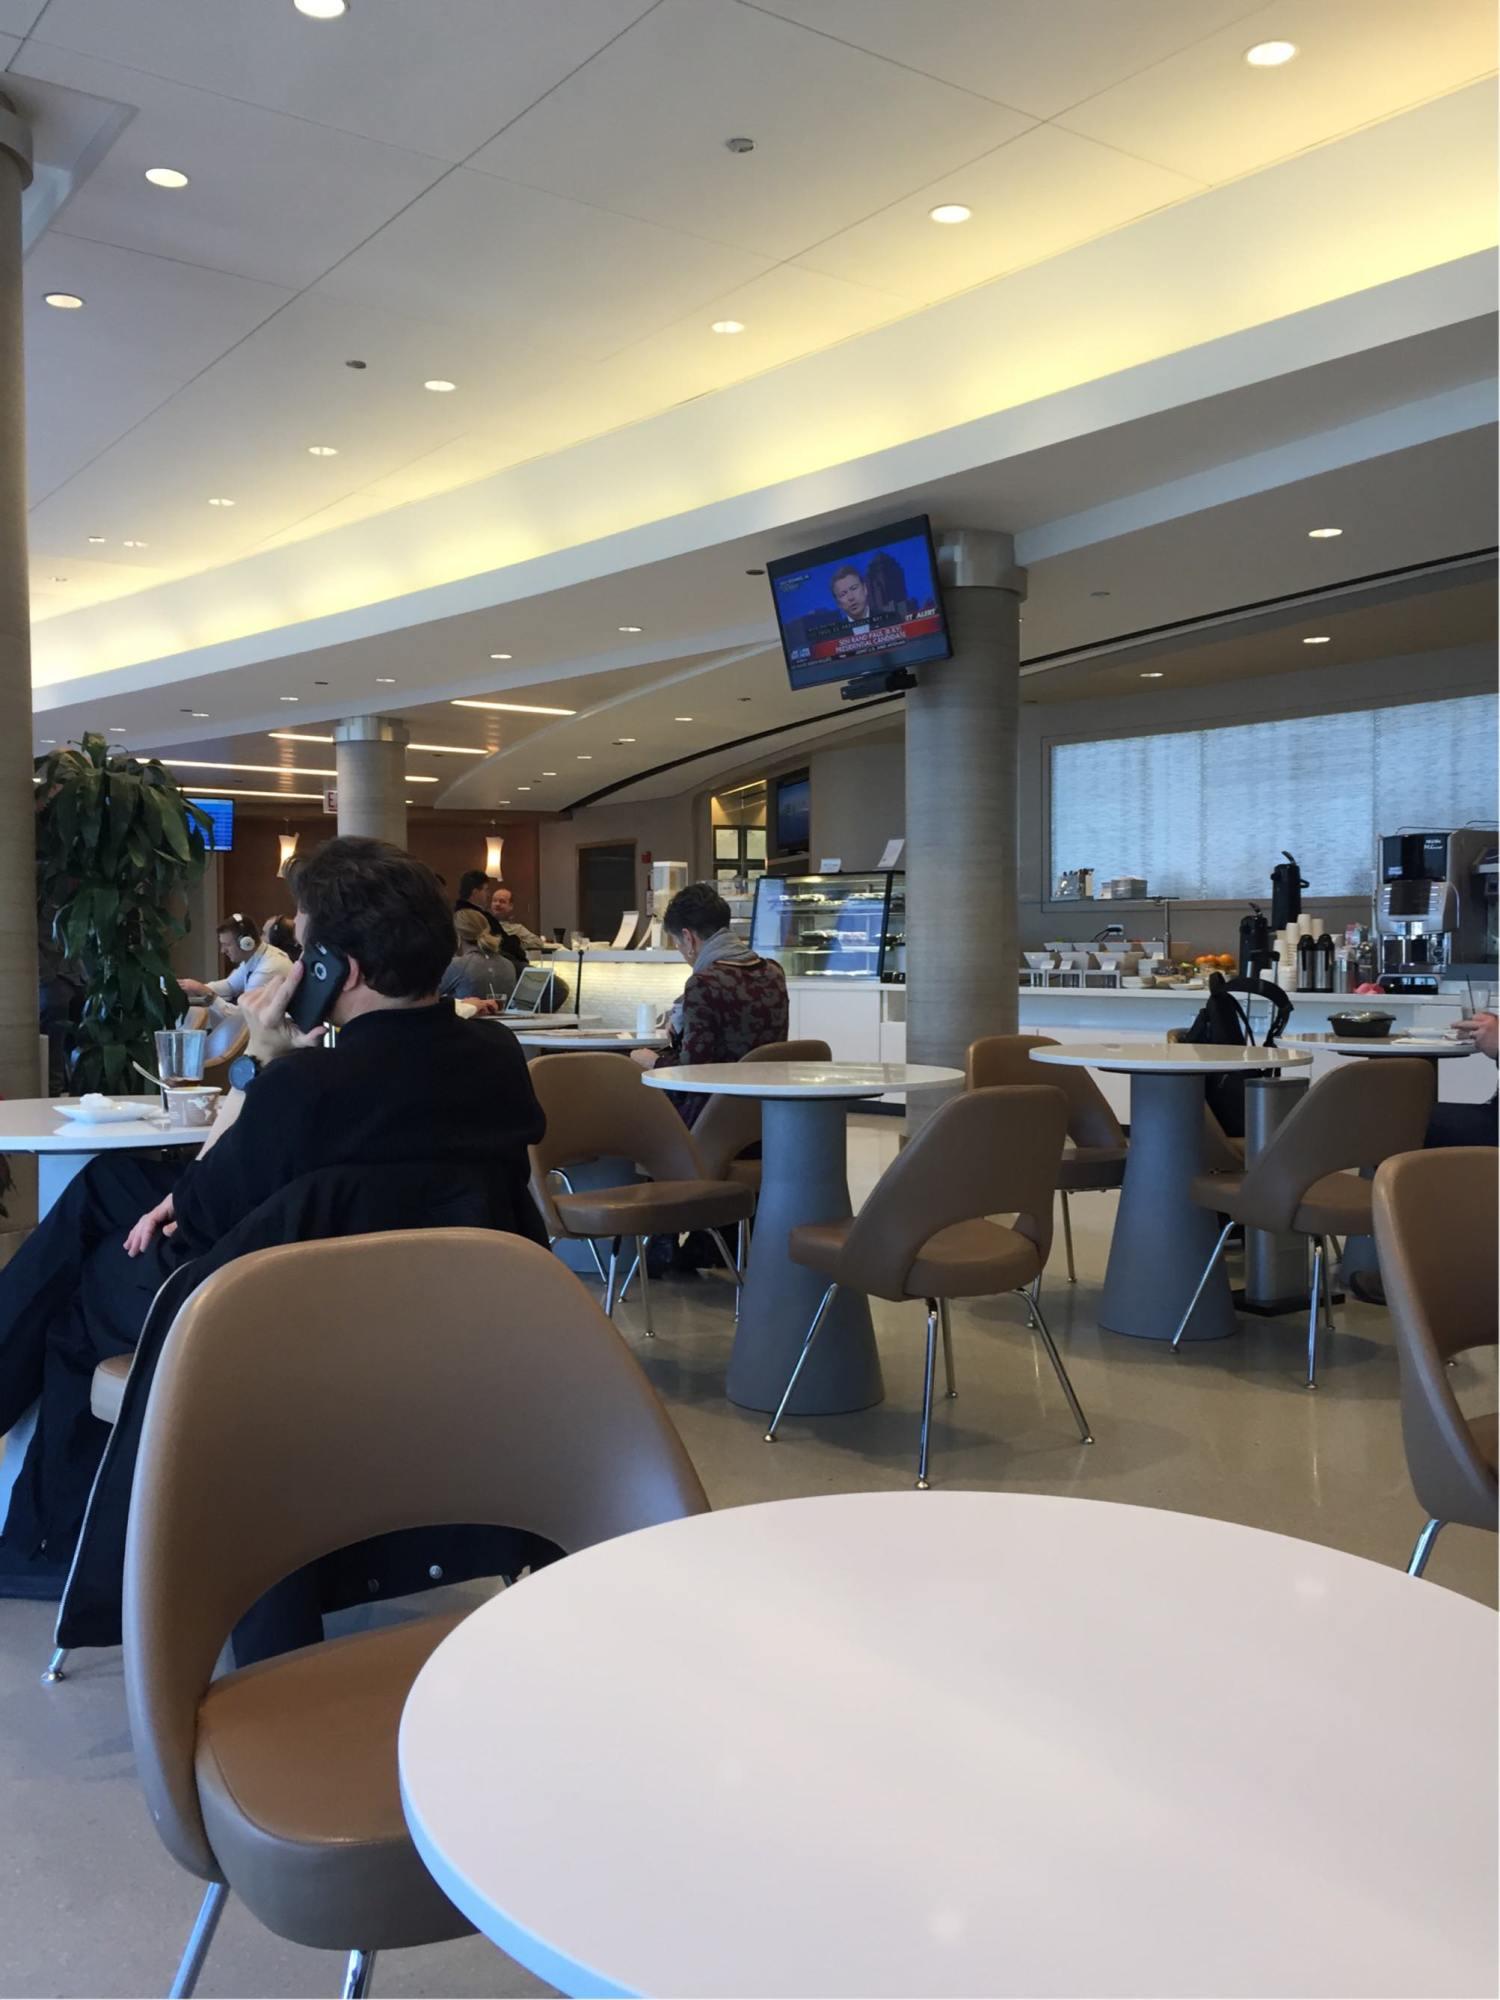 American Airlines Admirals Club image 42 of 50